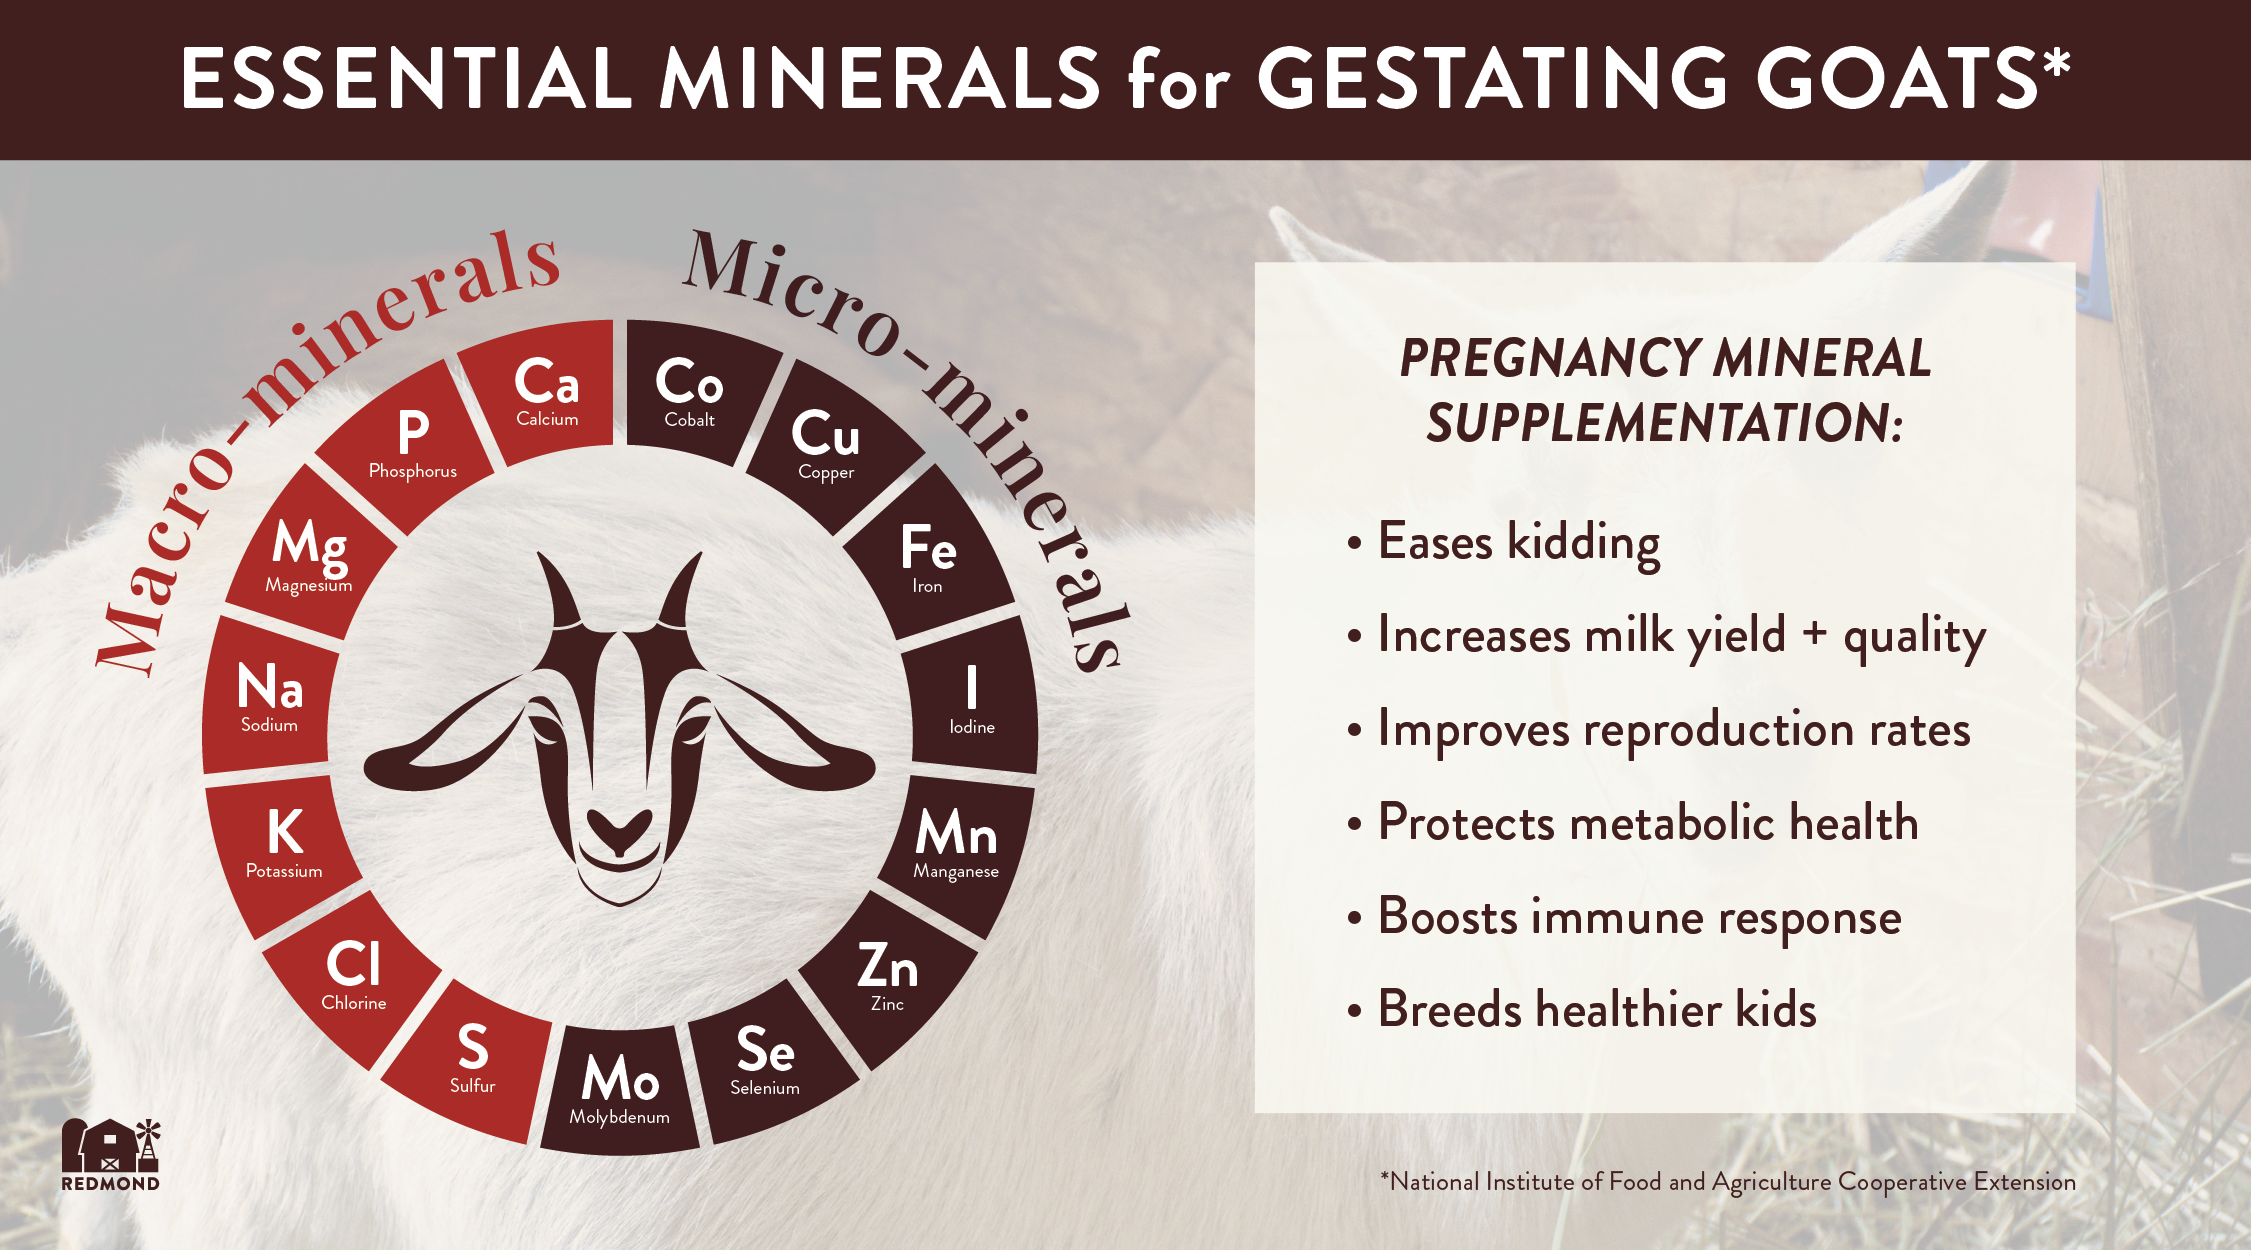 Essential minerals for gestating goats